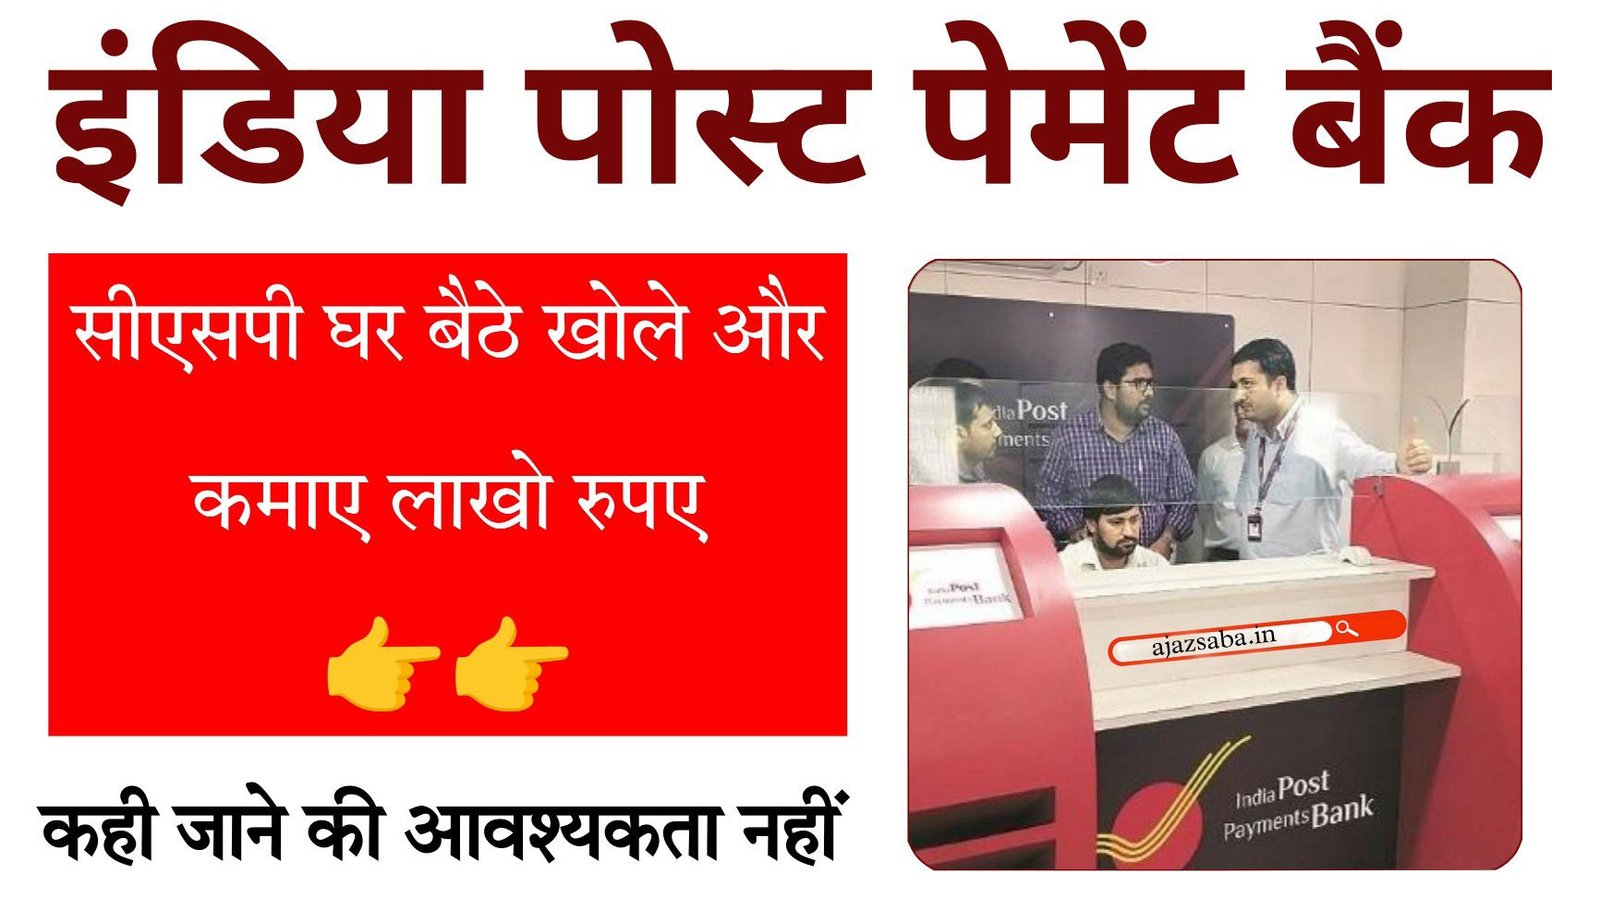 India Post Payment Bank Franchise Apply